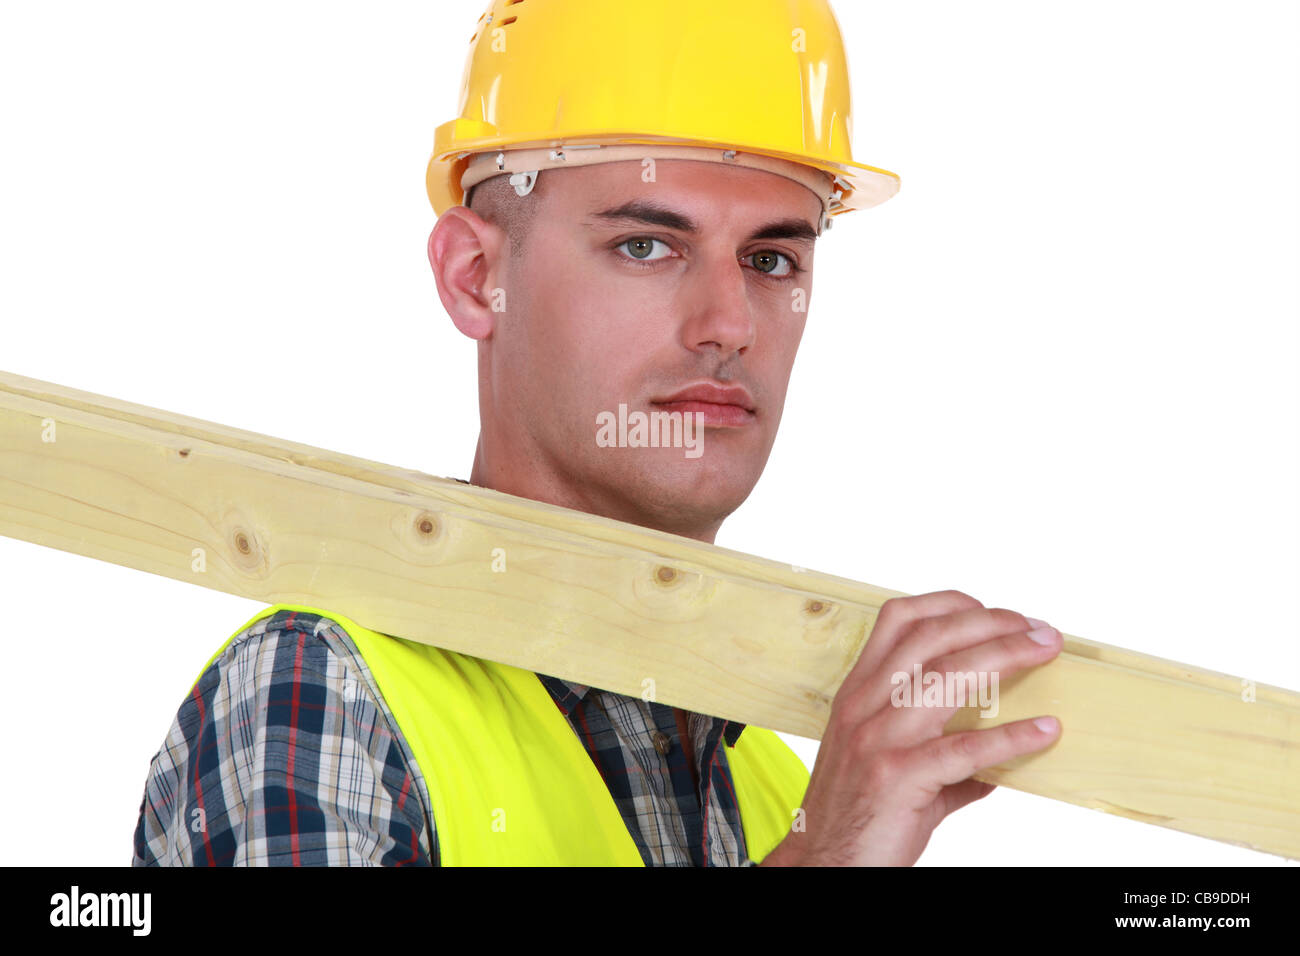 Labourer carrying a wooden plank Stock Photo